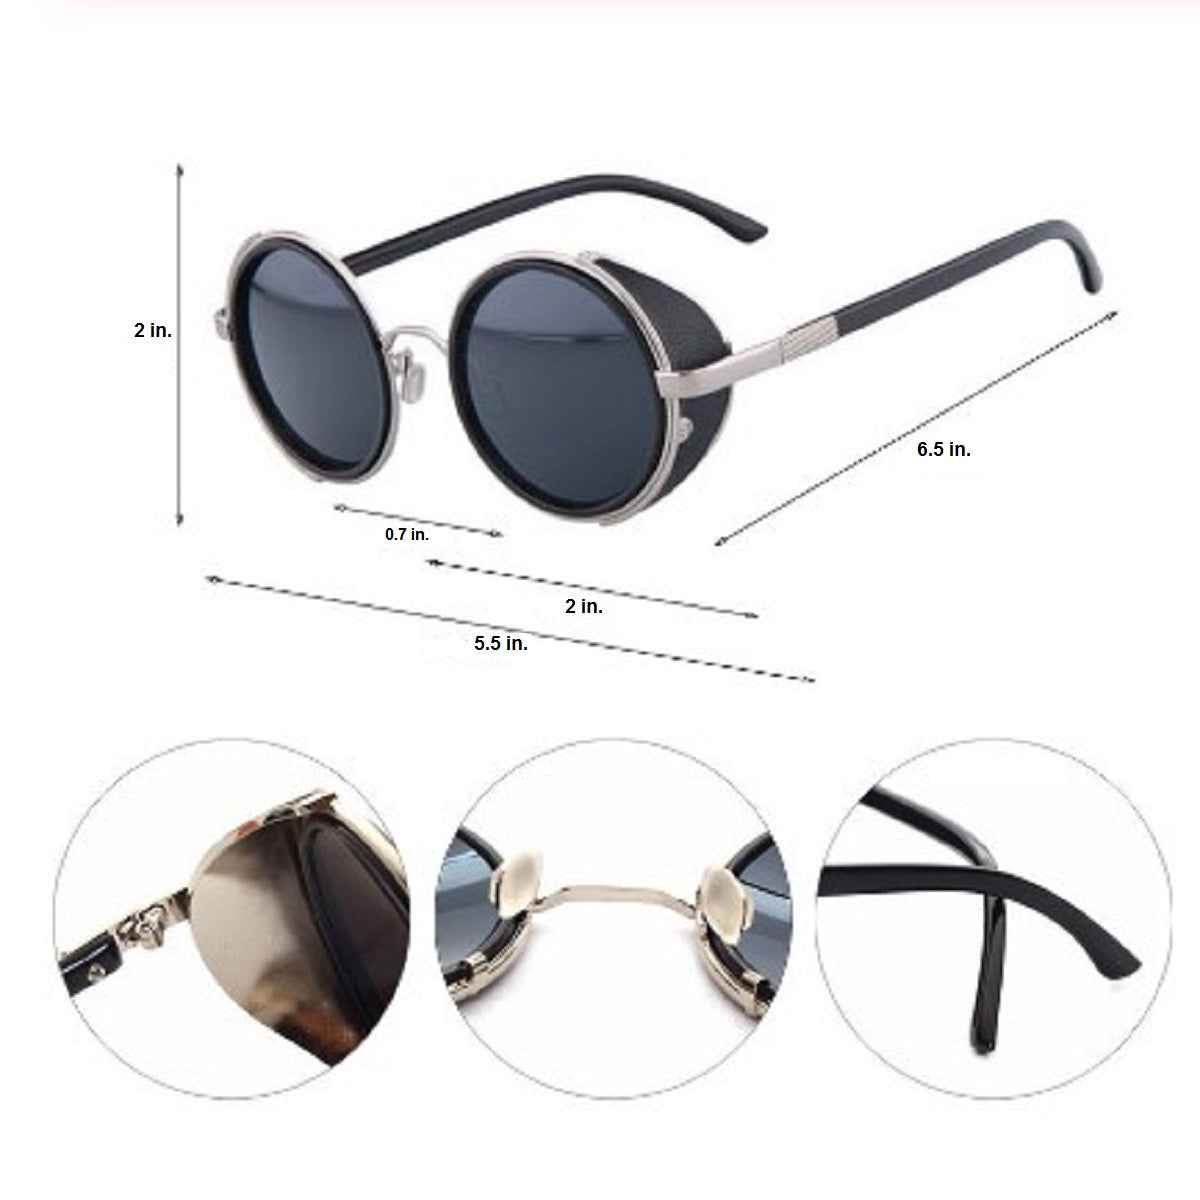 A pair of Motorcycle Vintage Round Sunglasses w/ UV 400 Protection, Silver/Black with a metal frame.